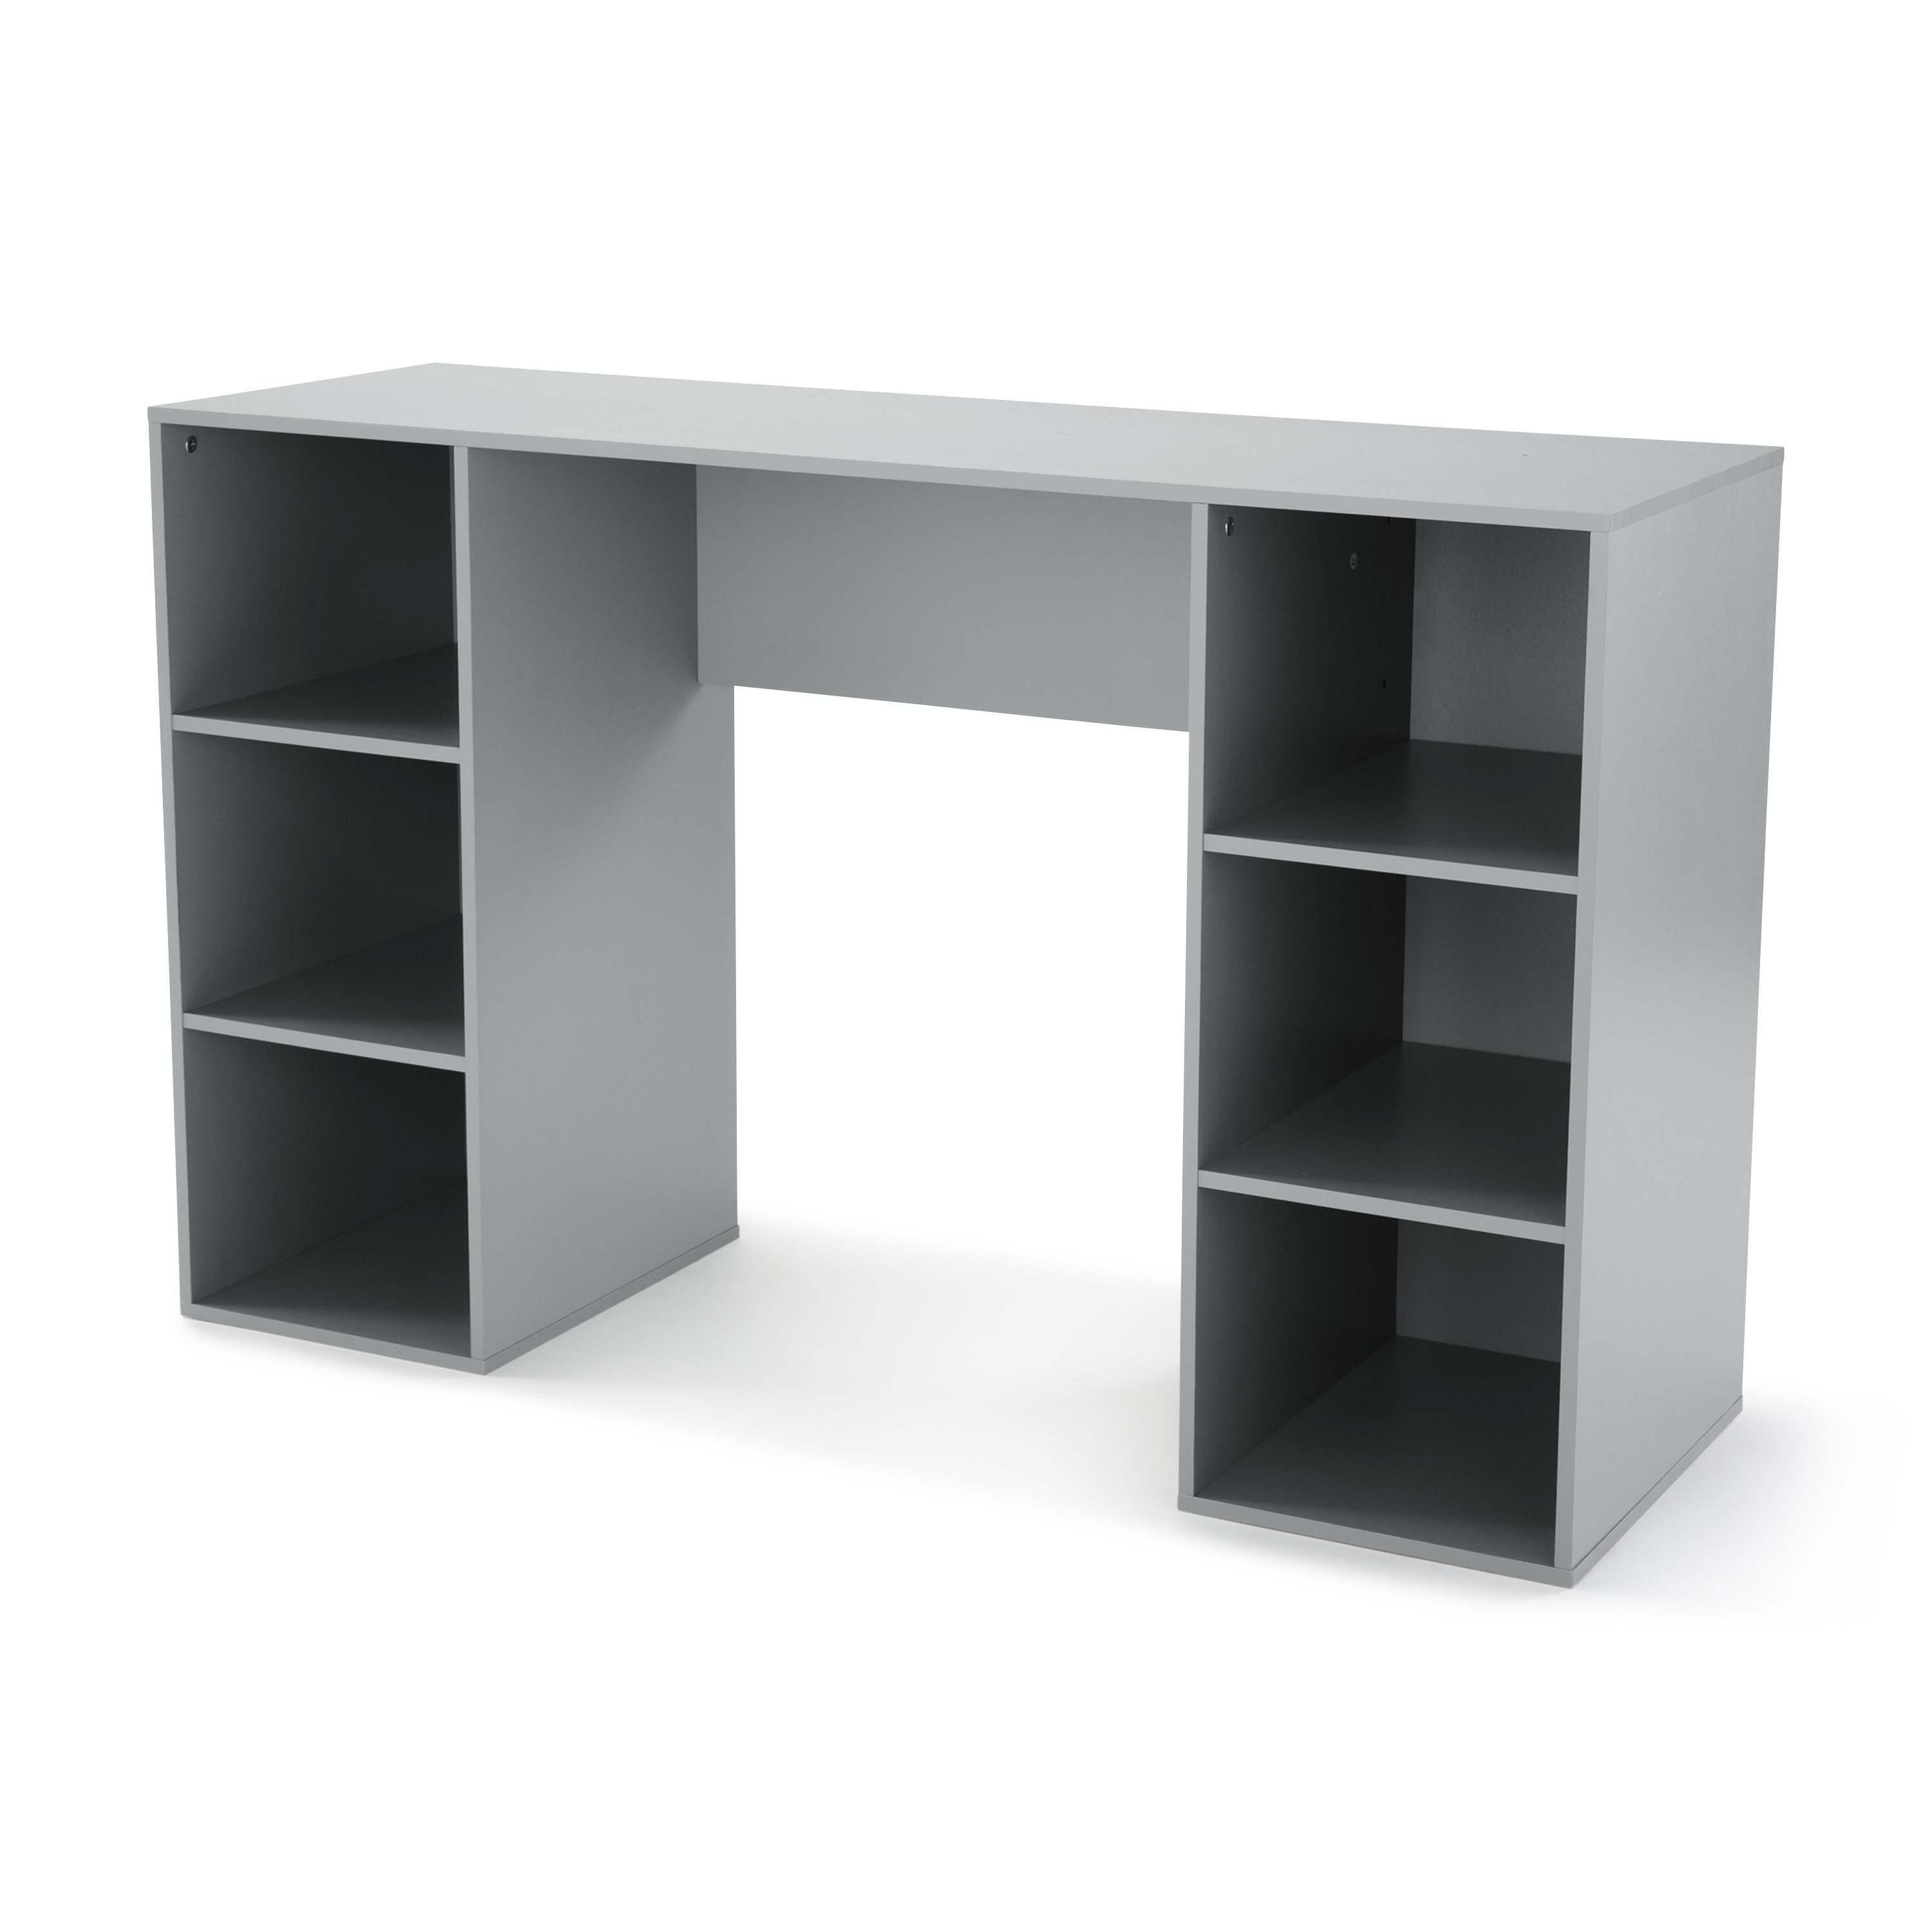 Mainstays 6-Cube Storage Computer Desk, Gray - image 2 of 5